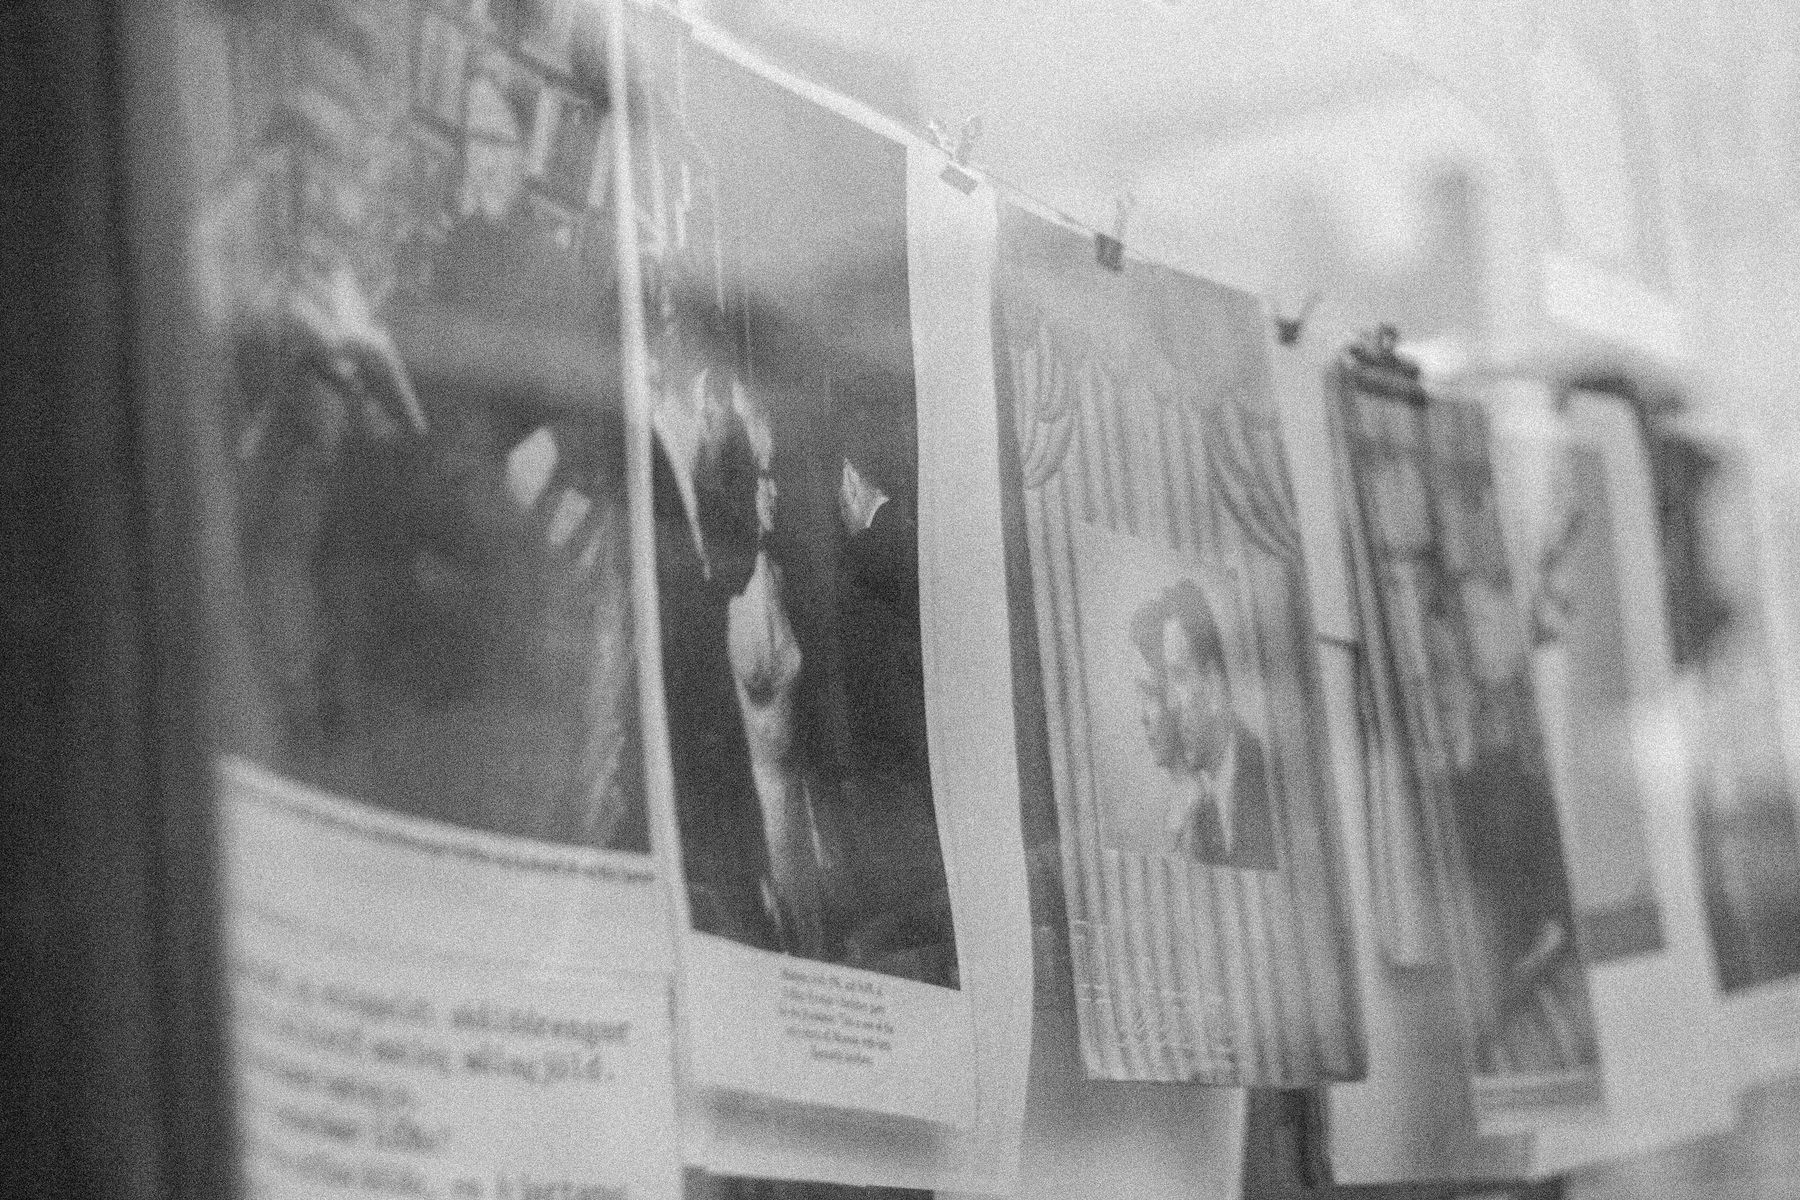 A picture of the display window of the used book store in Hverfisgata. The owner has hung a series of prints with captions on a clothesline.